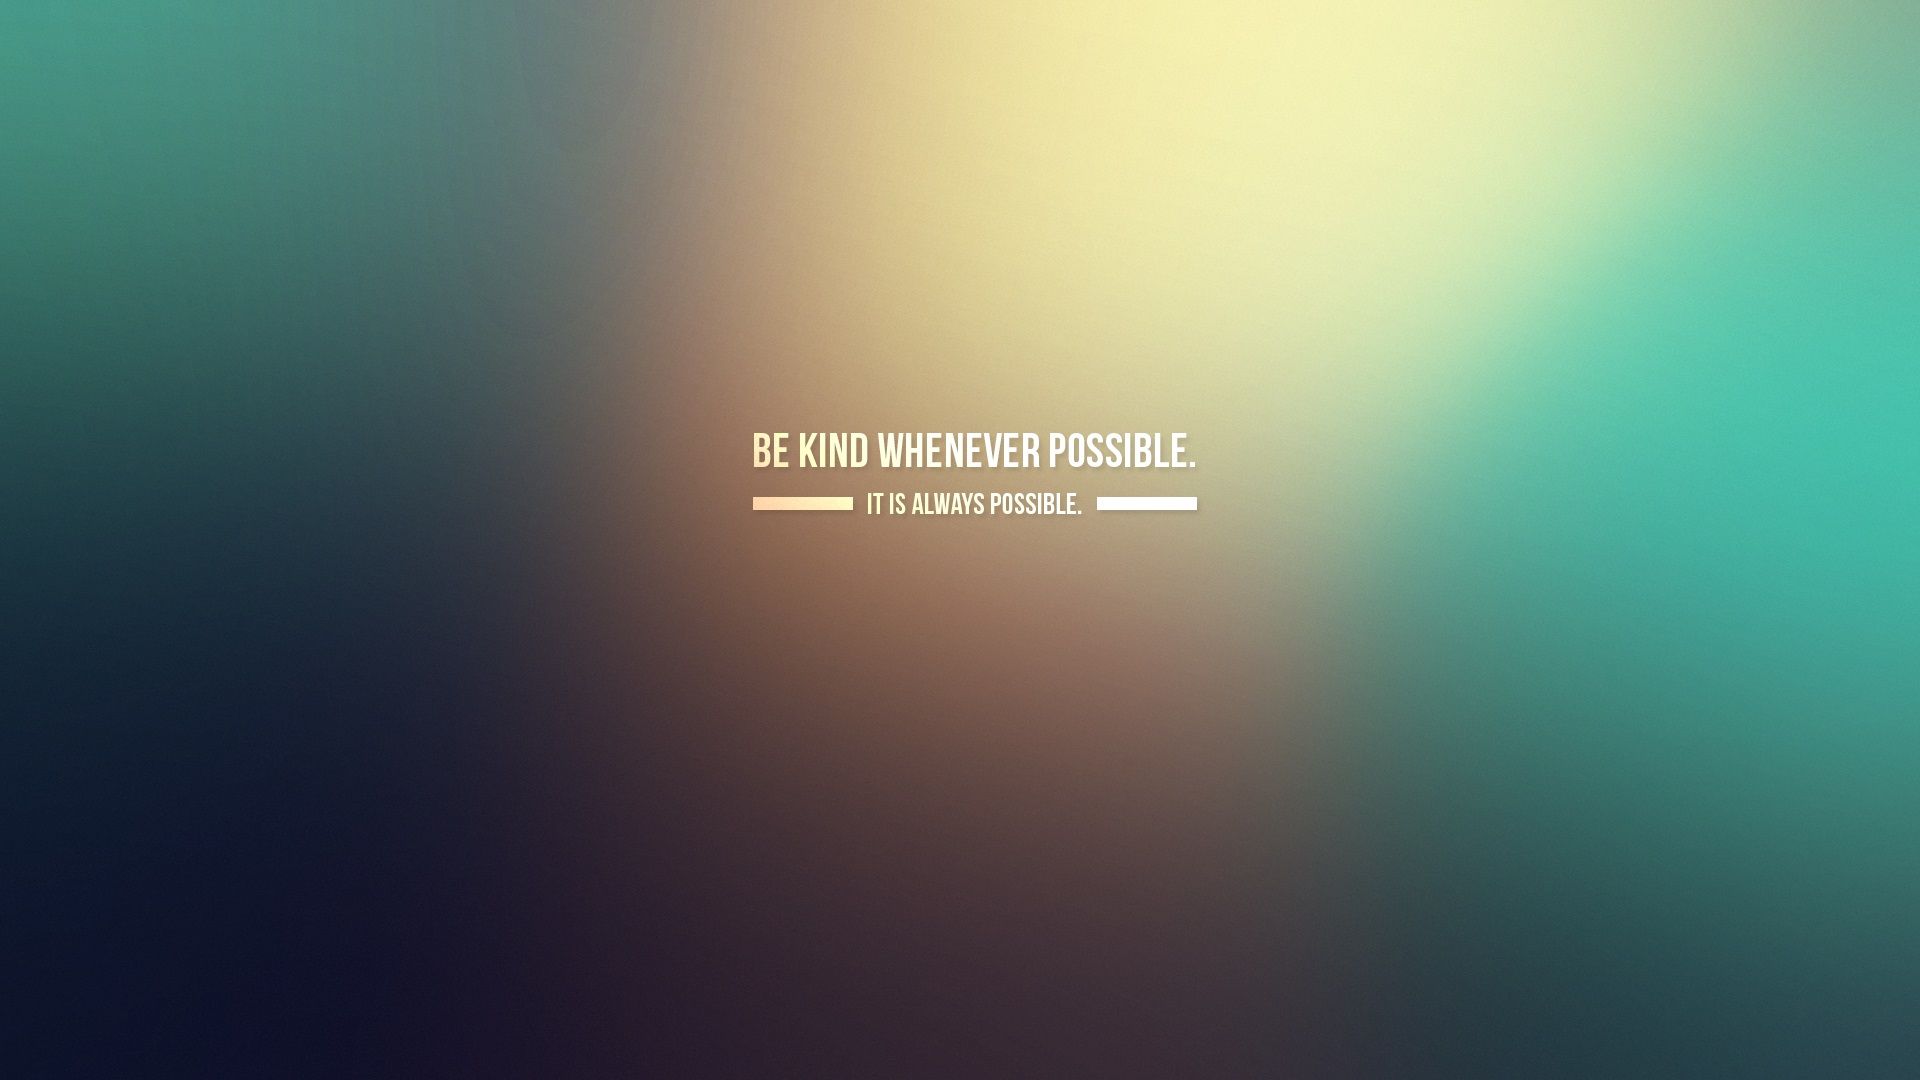 Be Kind Whenever Possible – HD Motivational Wallpapers